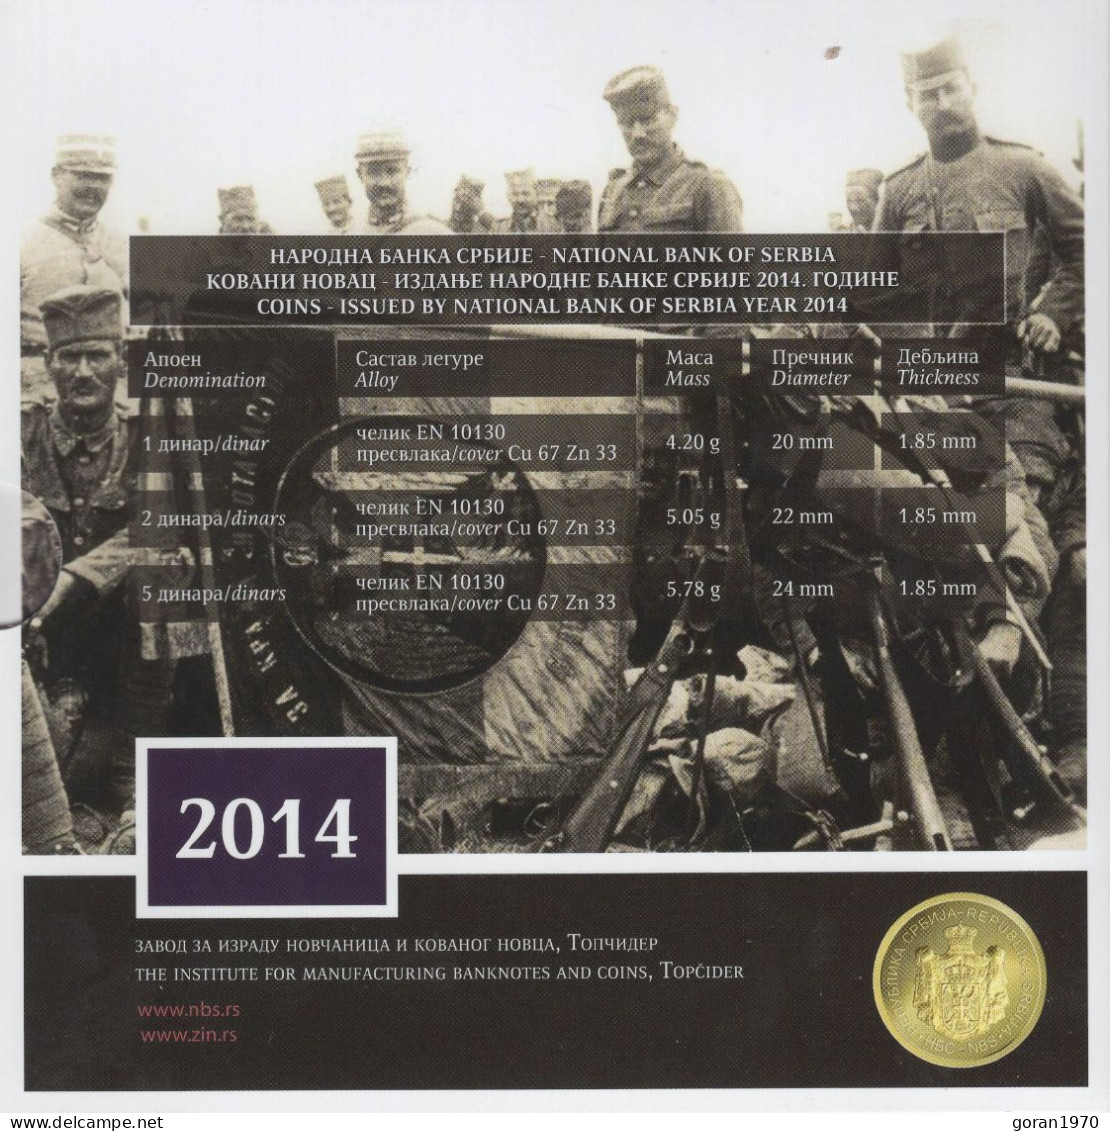 SERBIA Coin Set (1, 2, 5 Dinara + 2 Medals) ISSUED 2014 BY NATIONAL BANK OF SERBIA (Serbia In The Great War) - Serbia